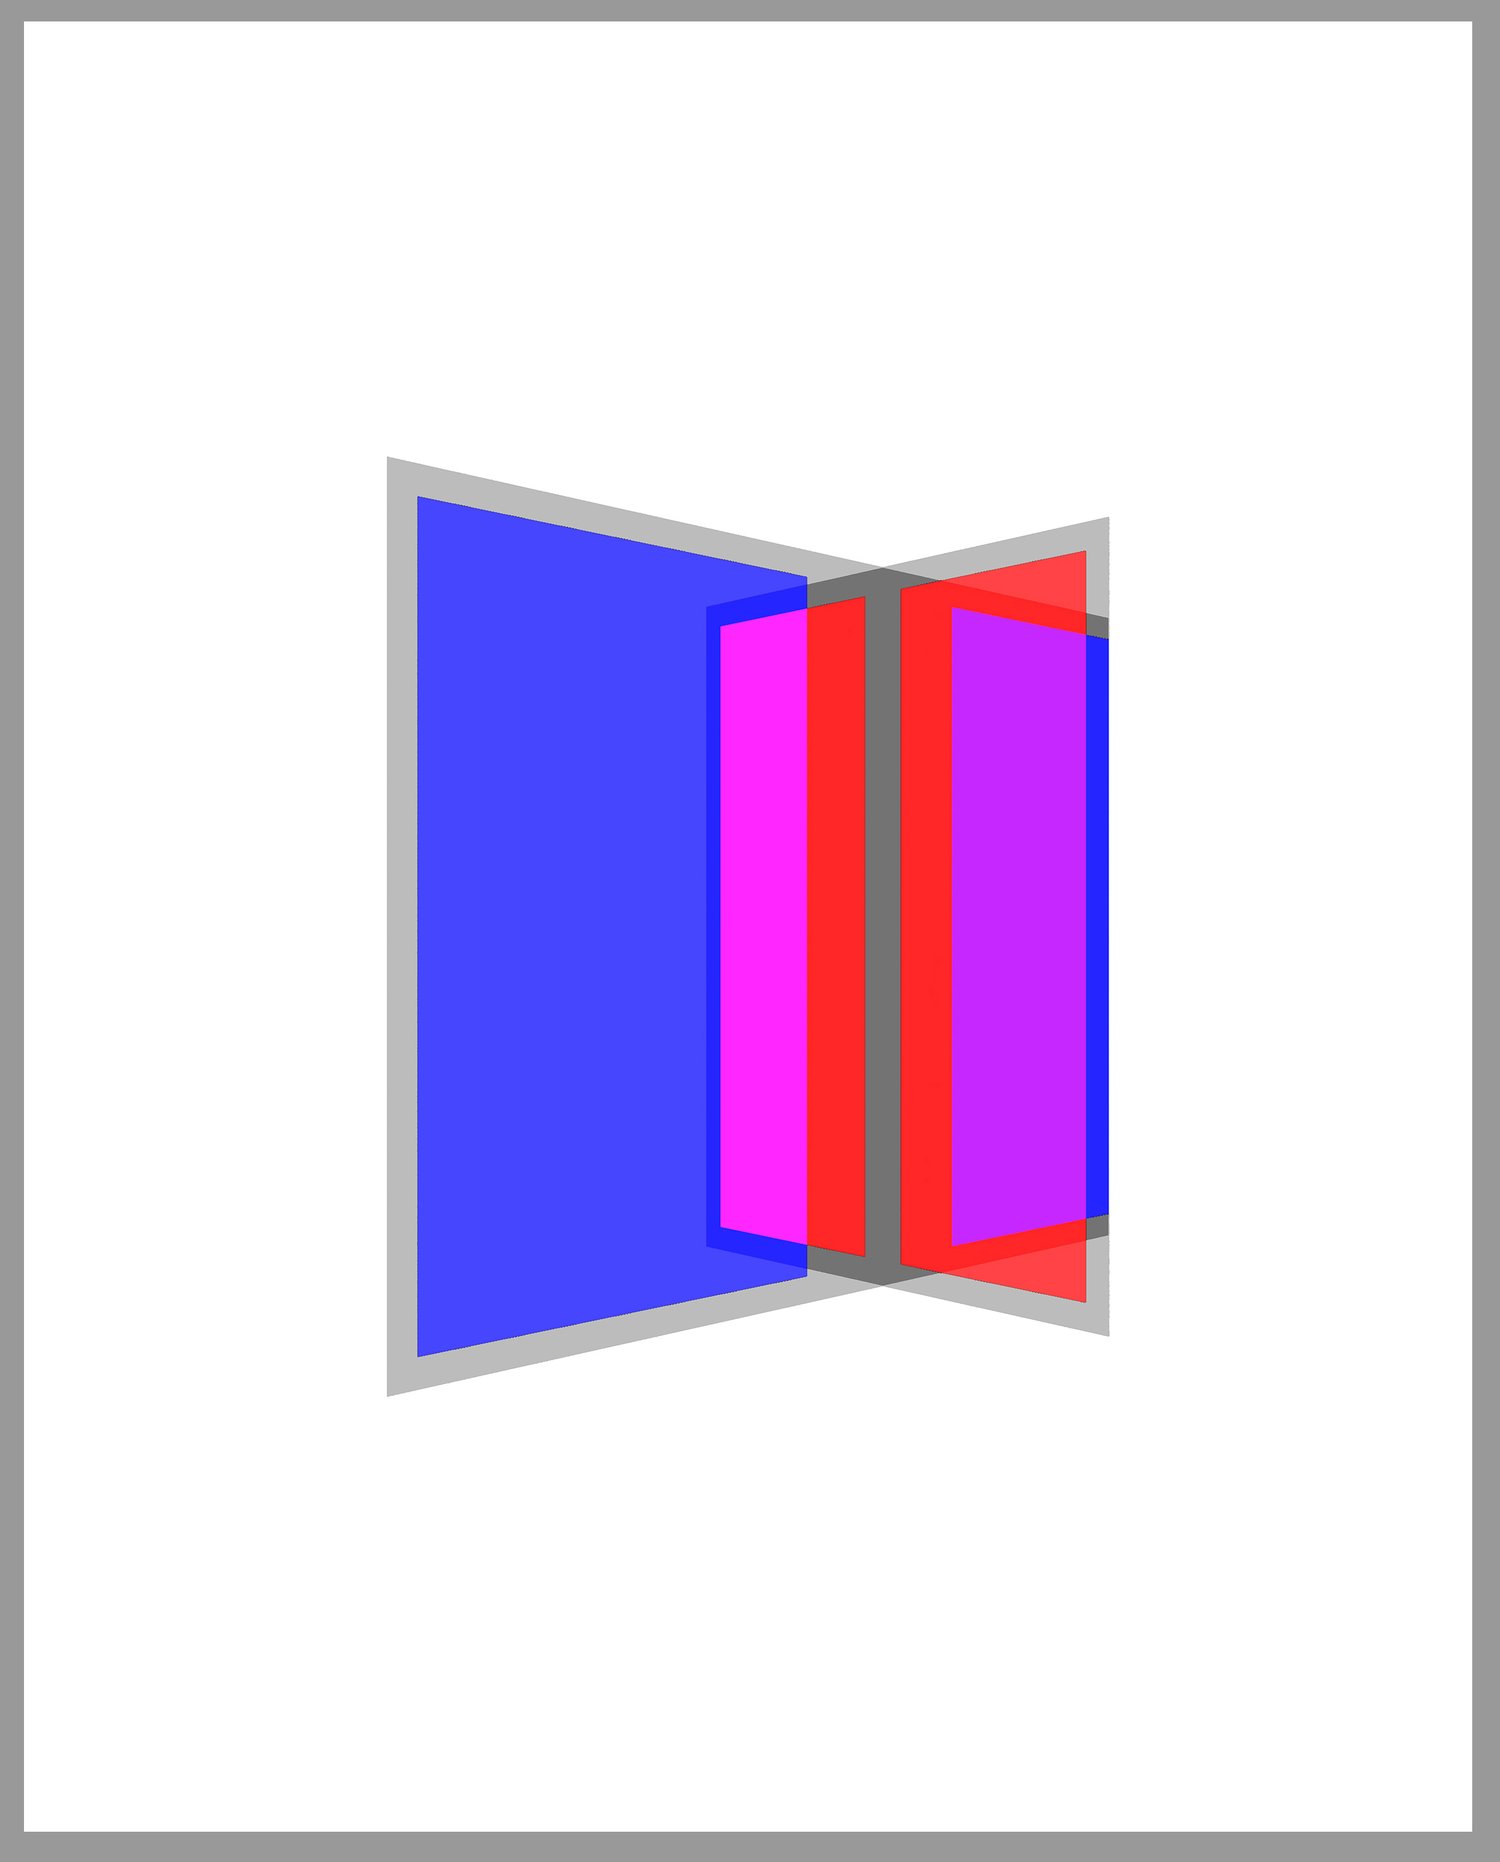 Image of Phillip K. Smith III, "10 Columns: Blue-Red," 2019